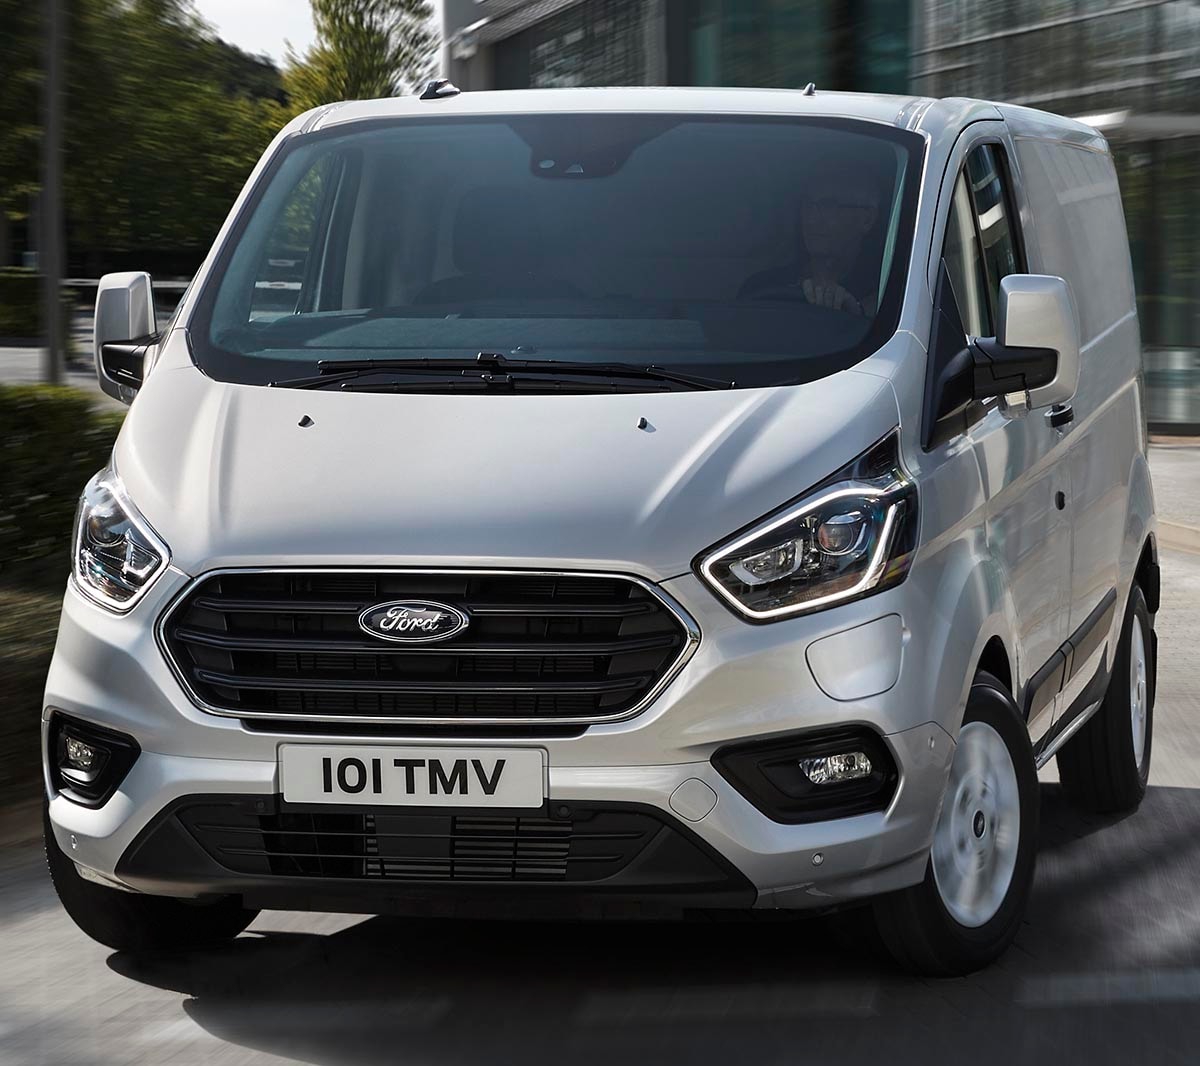 Ford Transit Custom front view